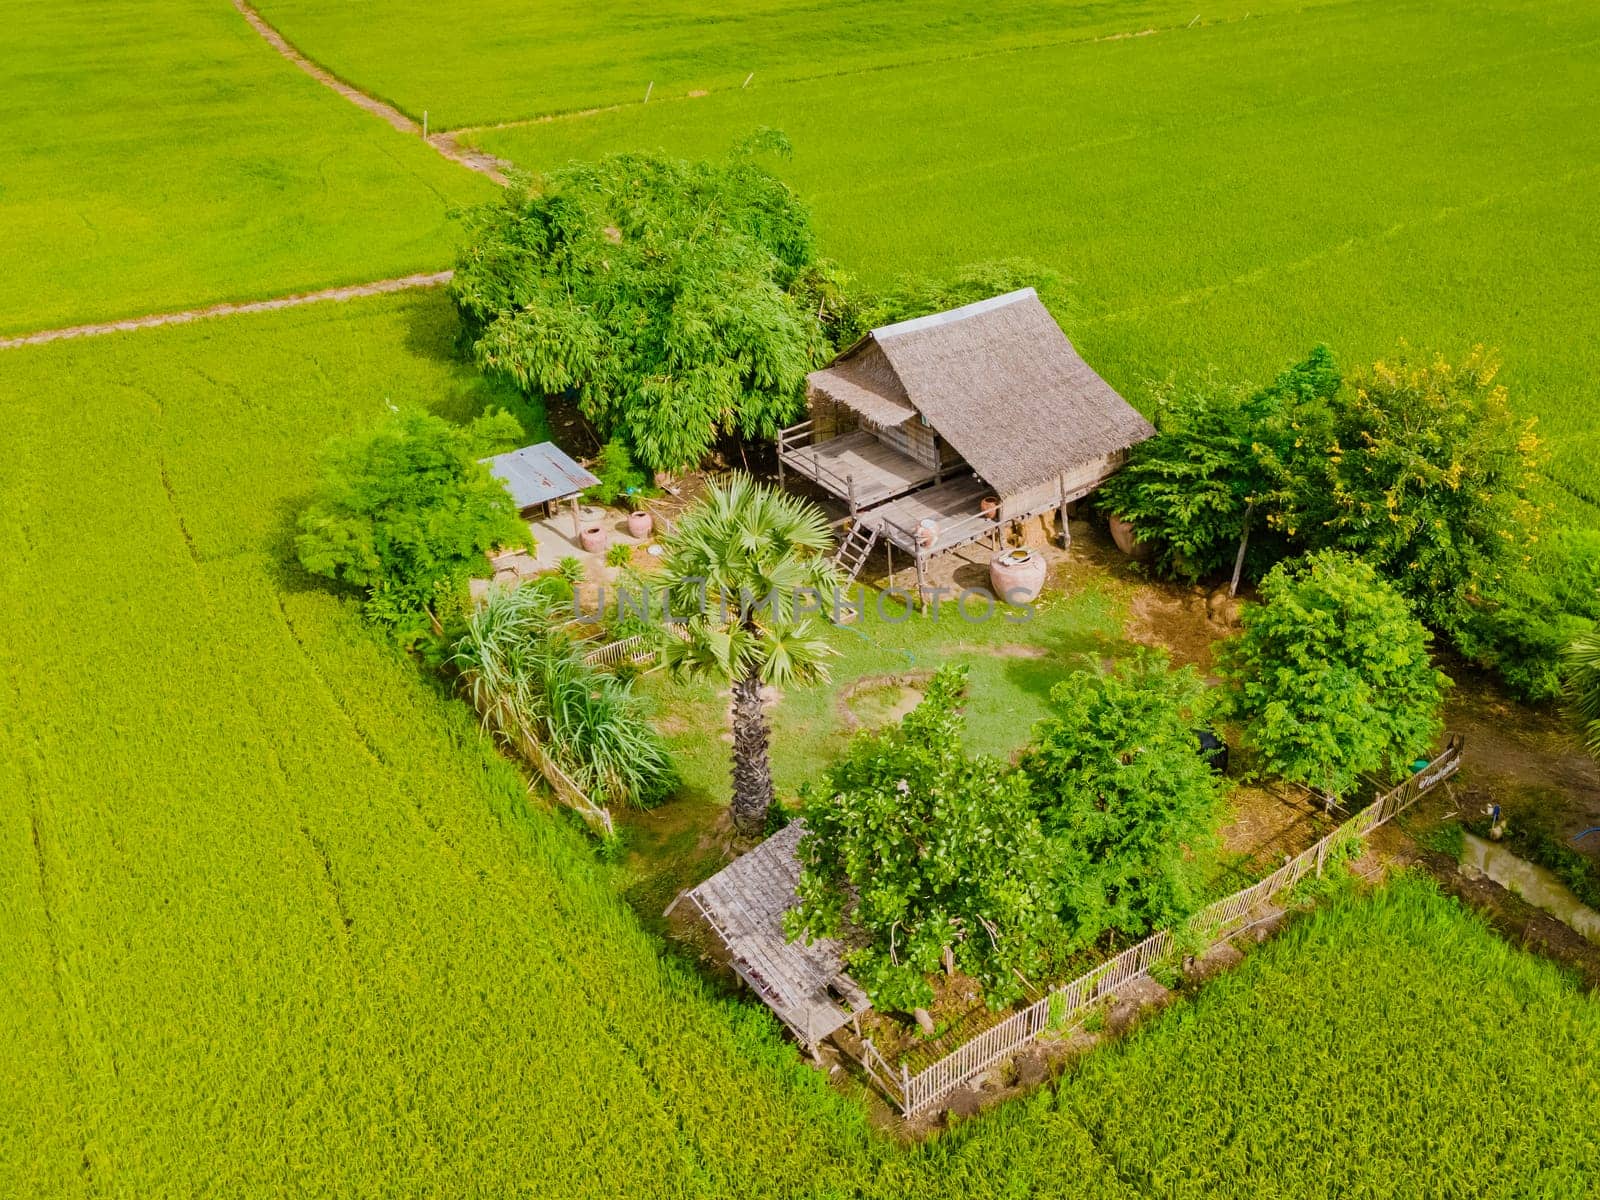 Green rice paddy fields in Central Thailand Suphanburi region by fokkebok